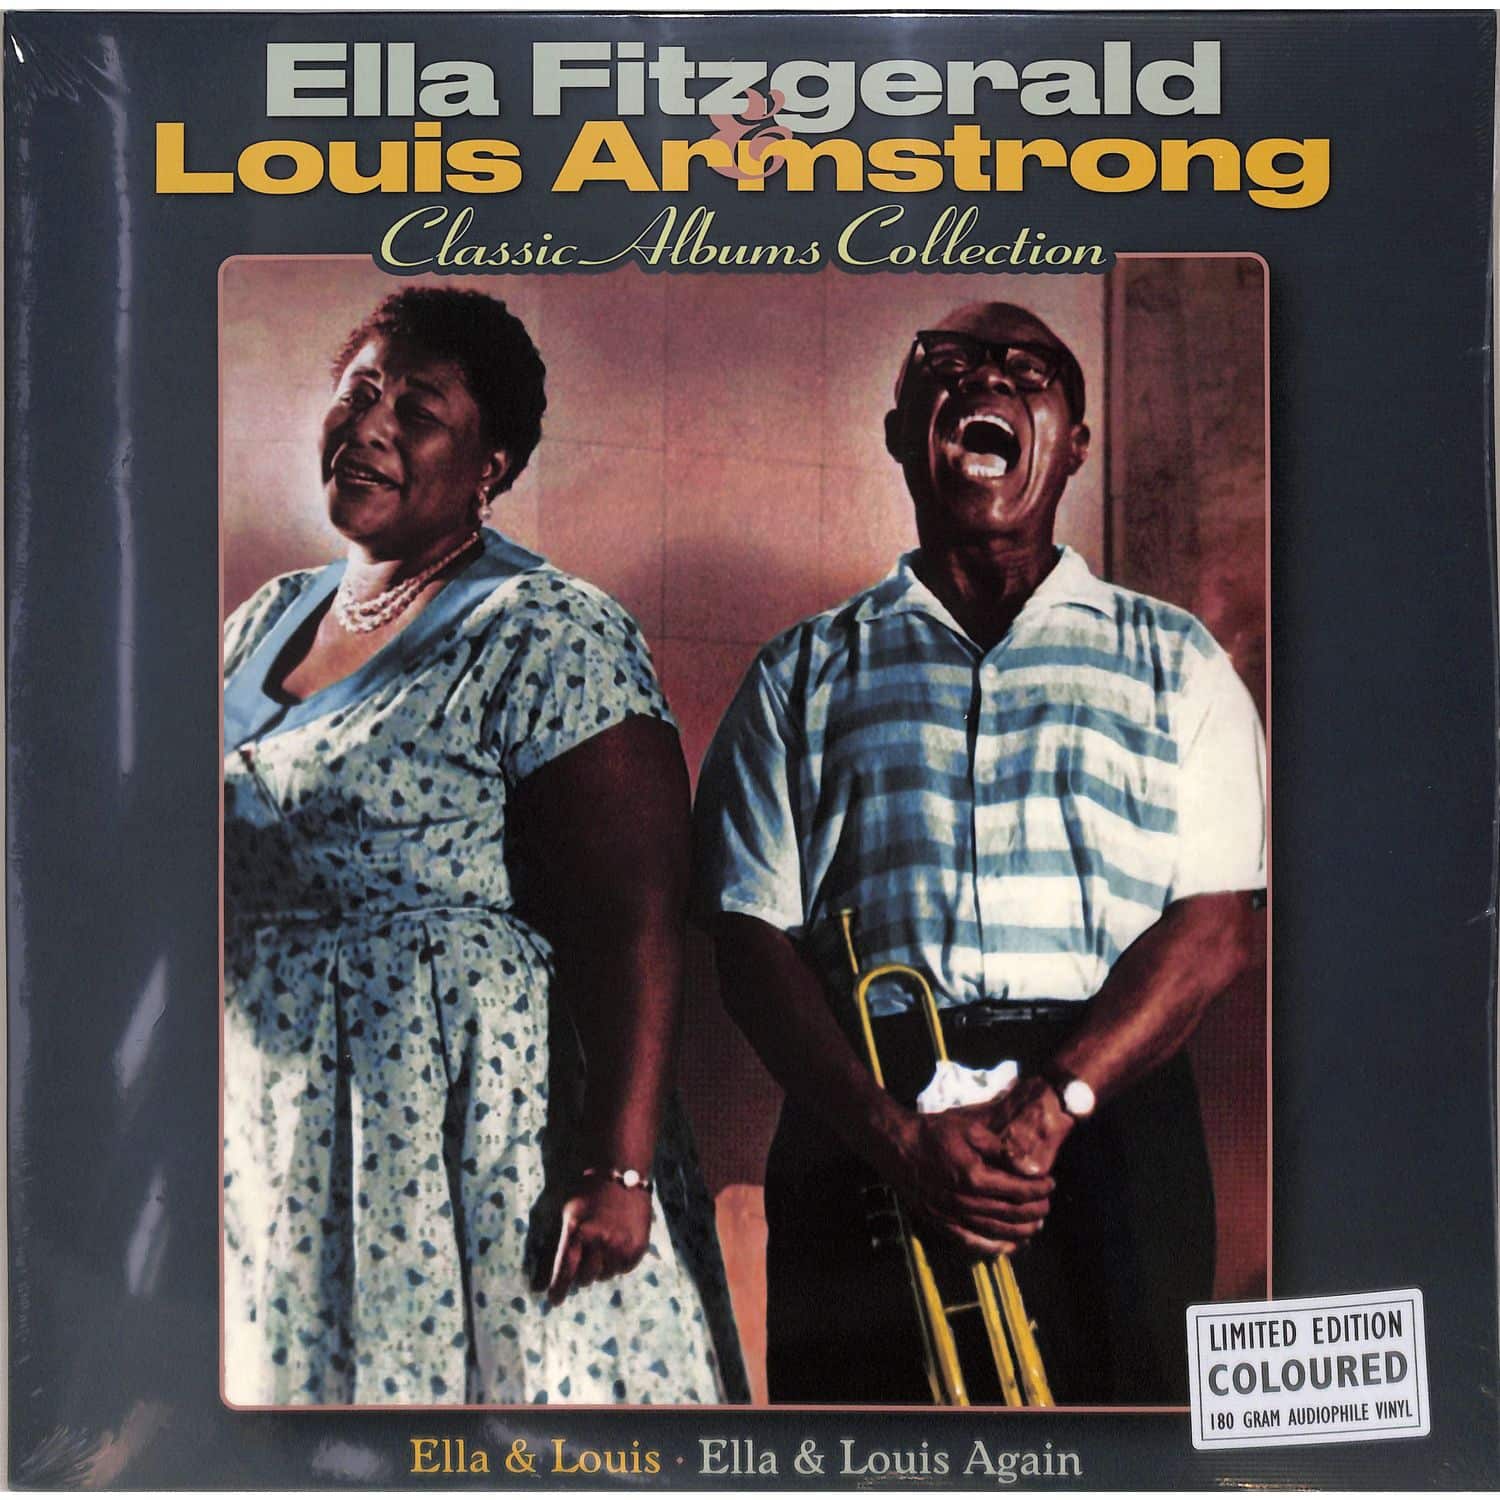 Ella Fitzgerald & Louis Armstrong - CLASSIC ALBUMS COLLECTION 